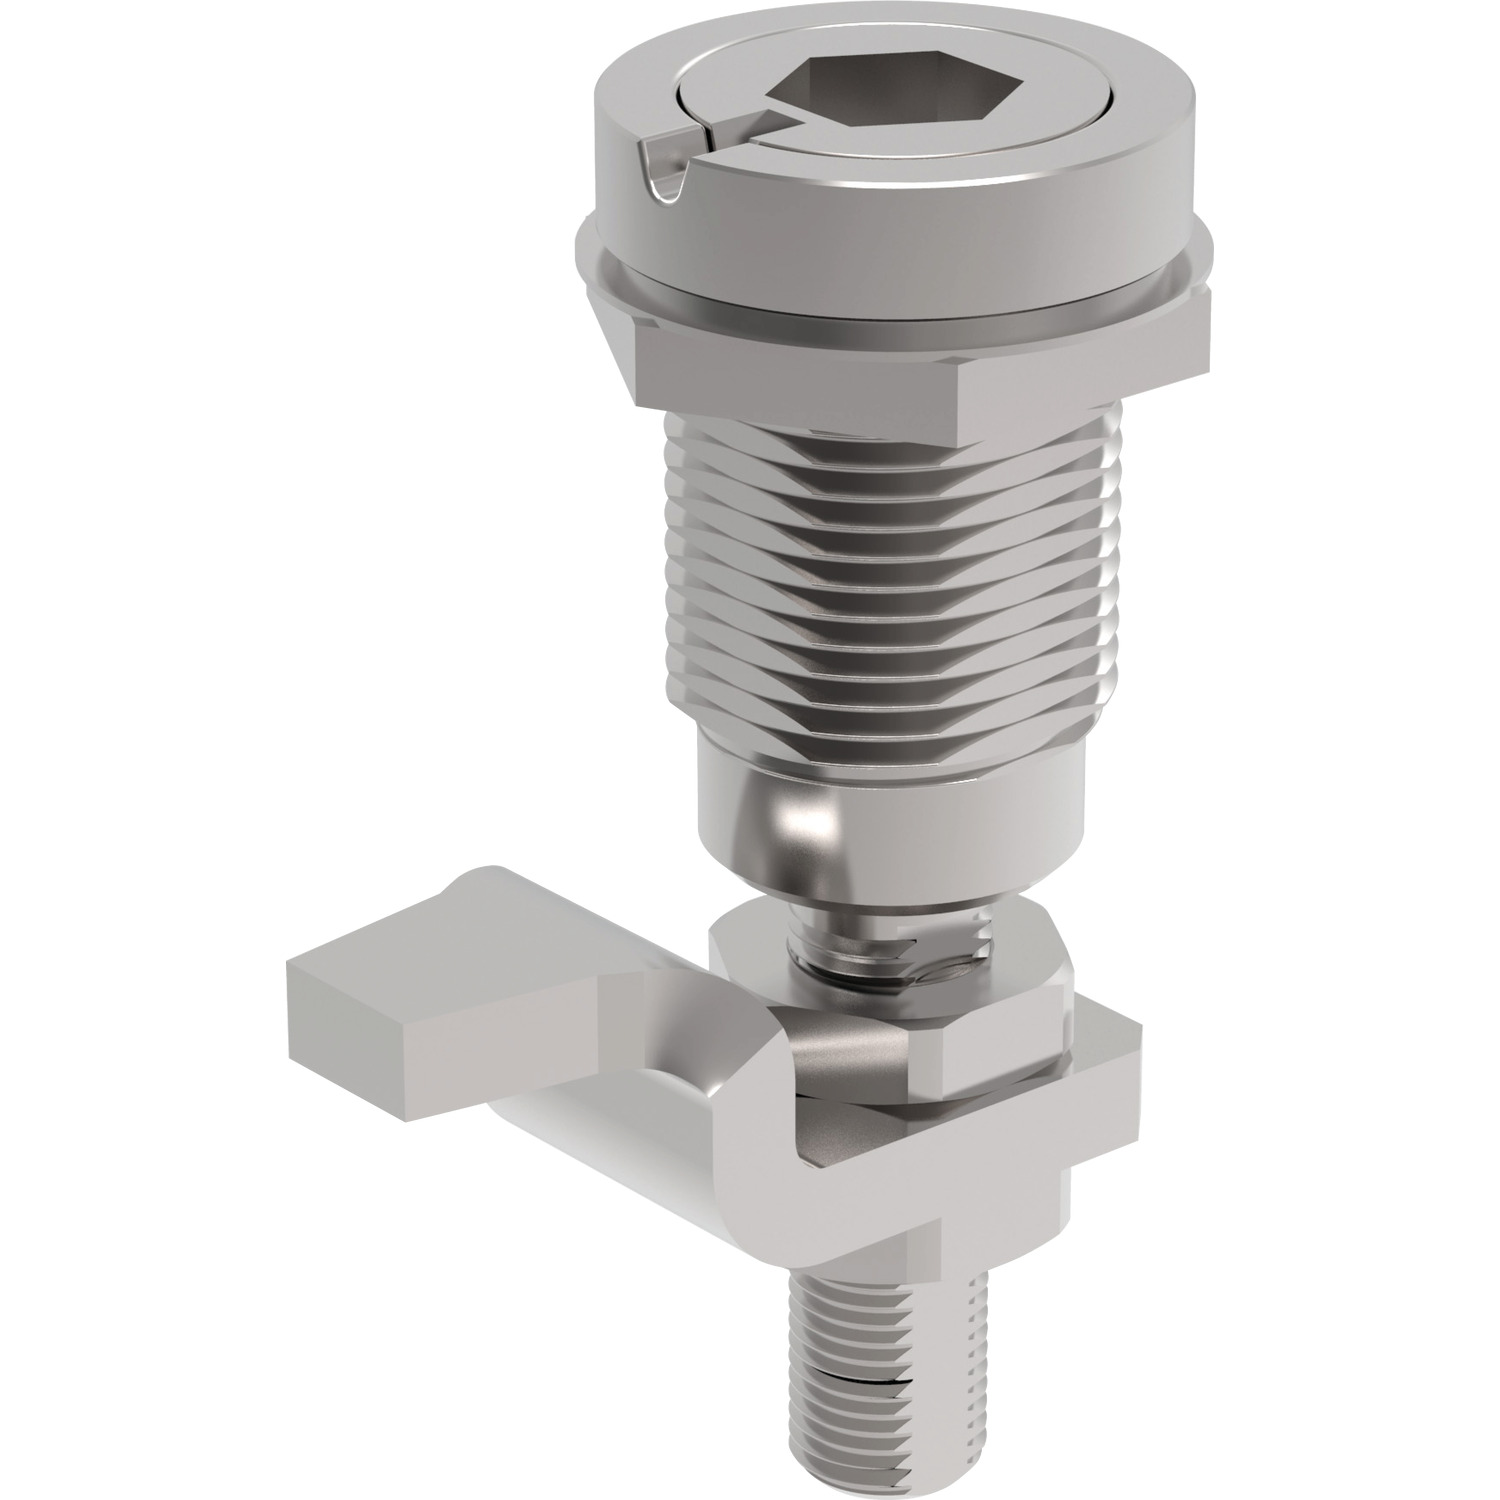 A1611.AW0085 Comp. Latch Flexi-Sys - 8 mm Hex insert driver - adj. grip - ZDC, Chrome plated